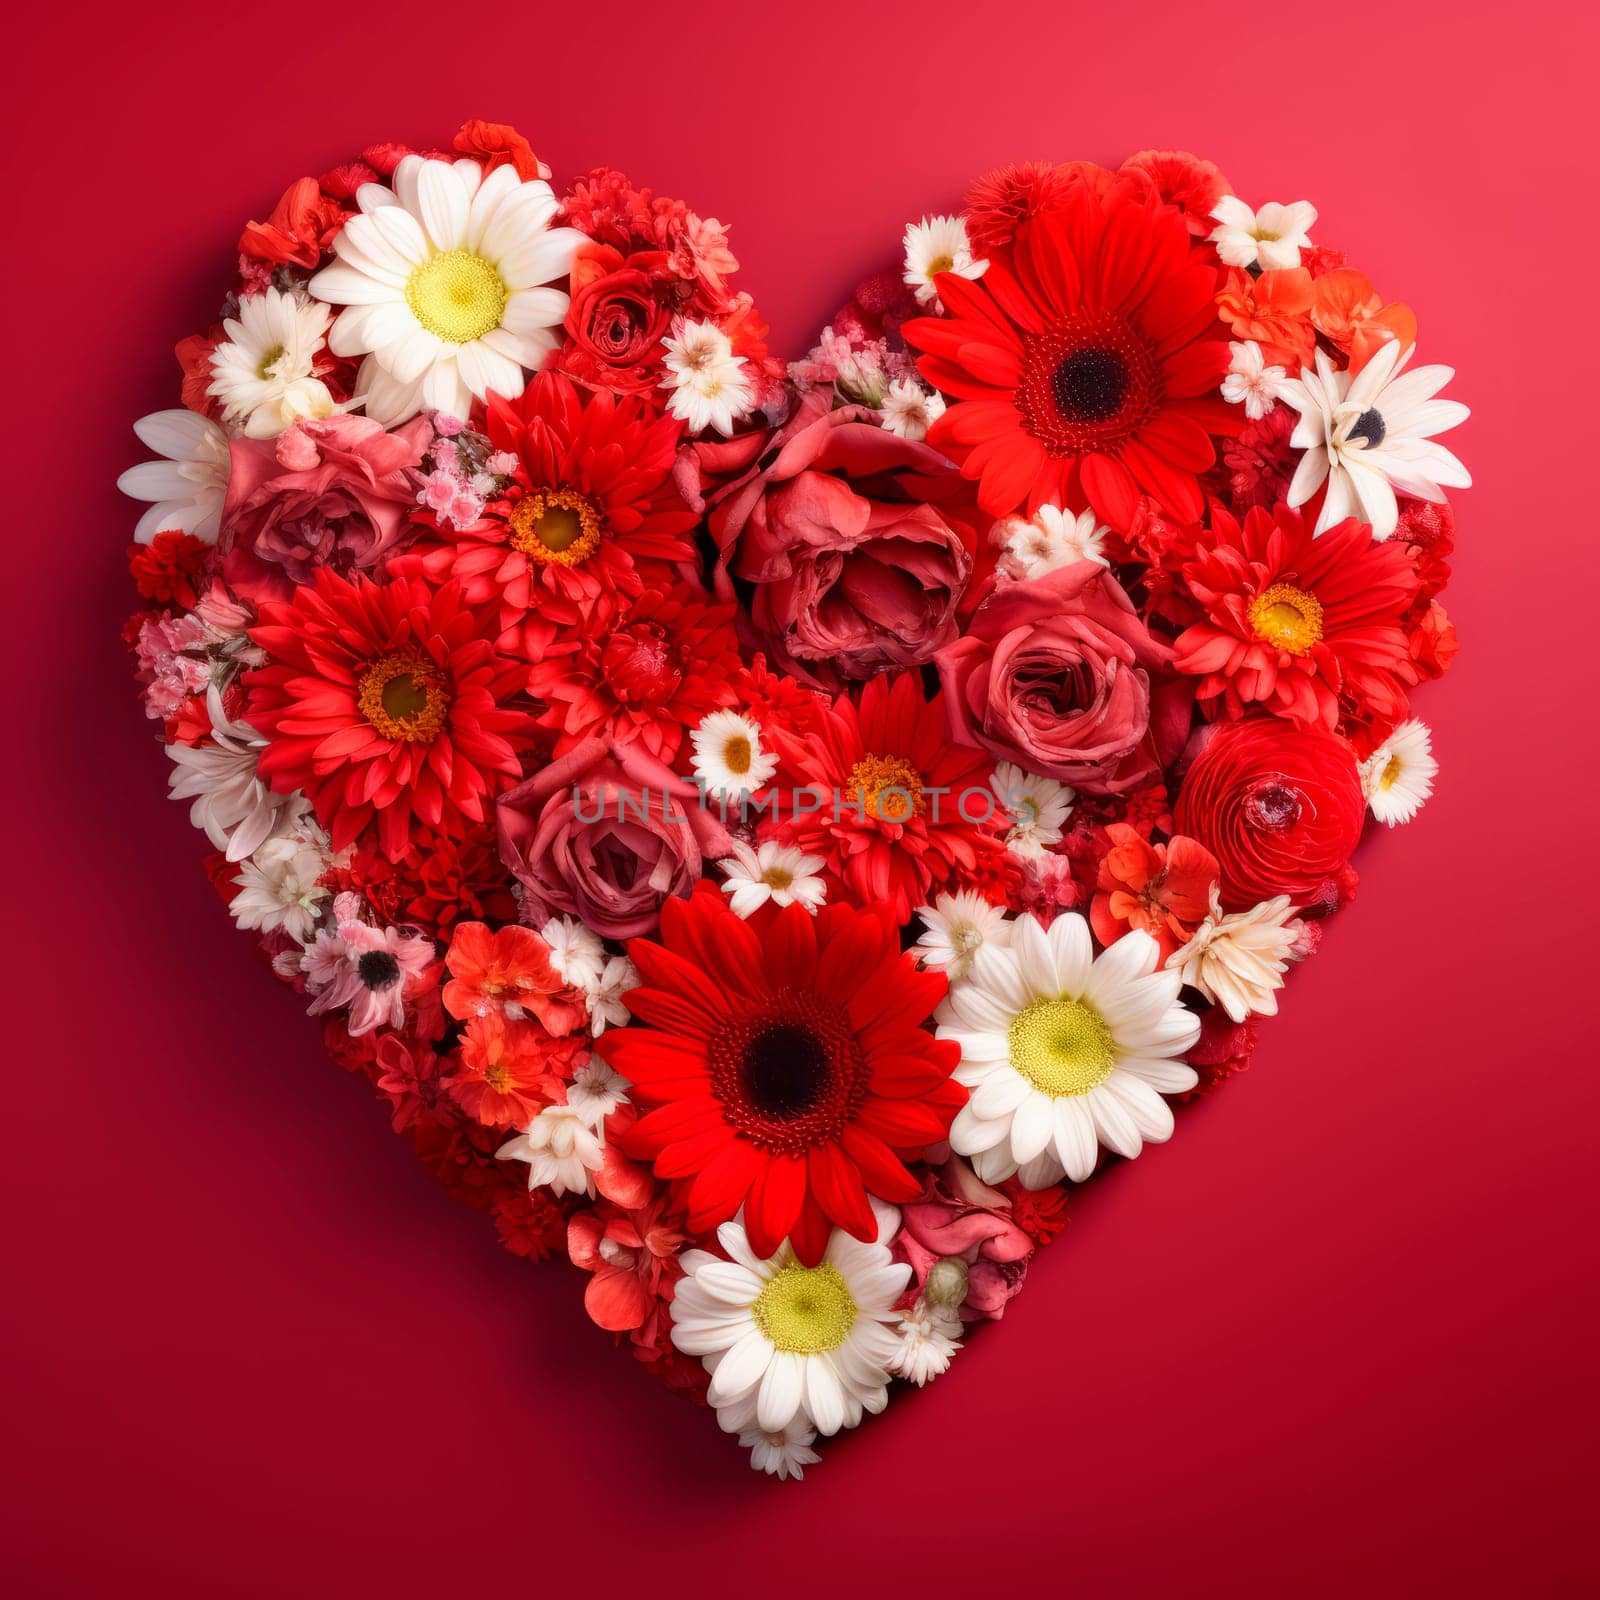 The heart is lined with beautiful flowers on a red background by Spirina